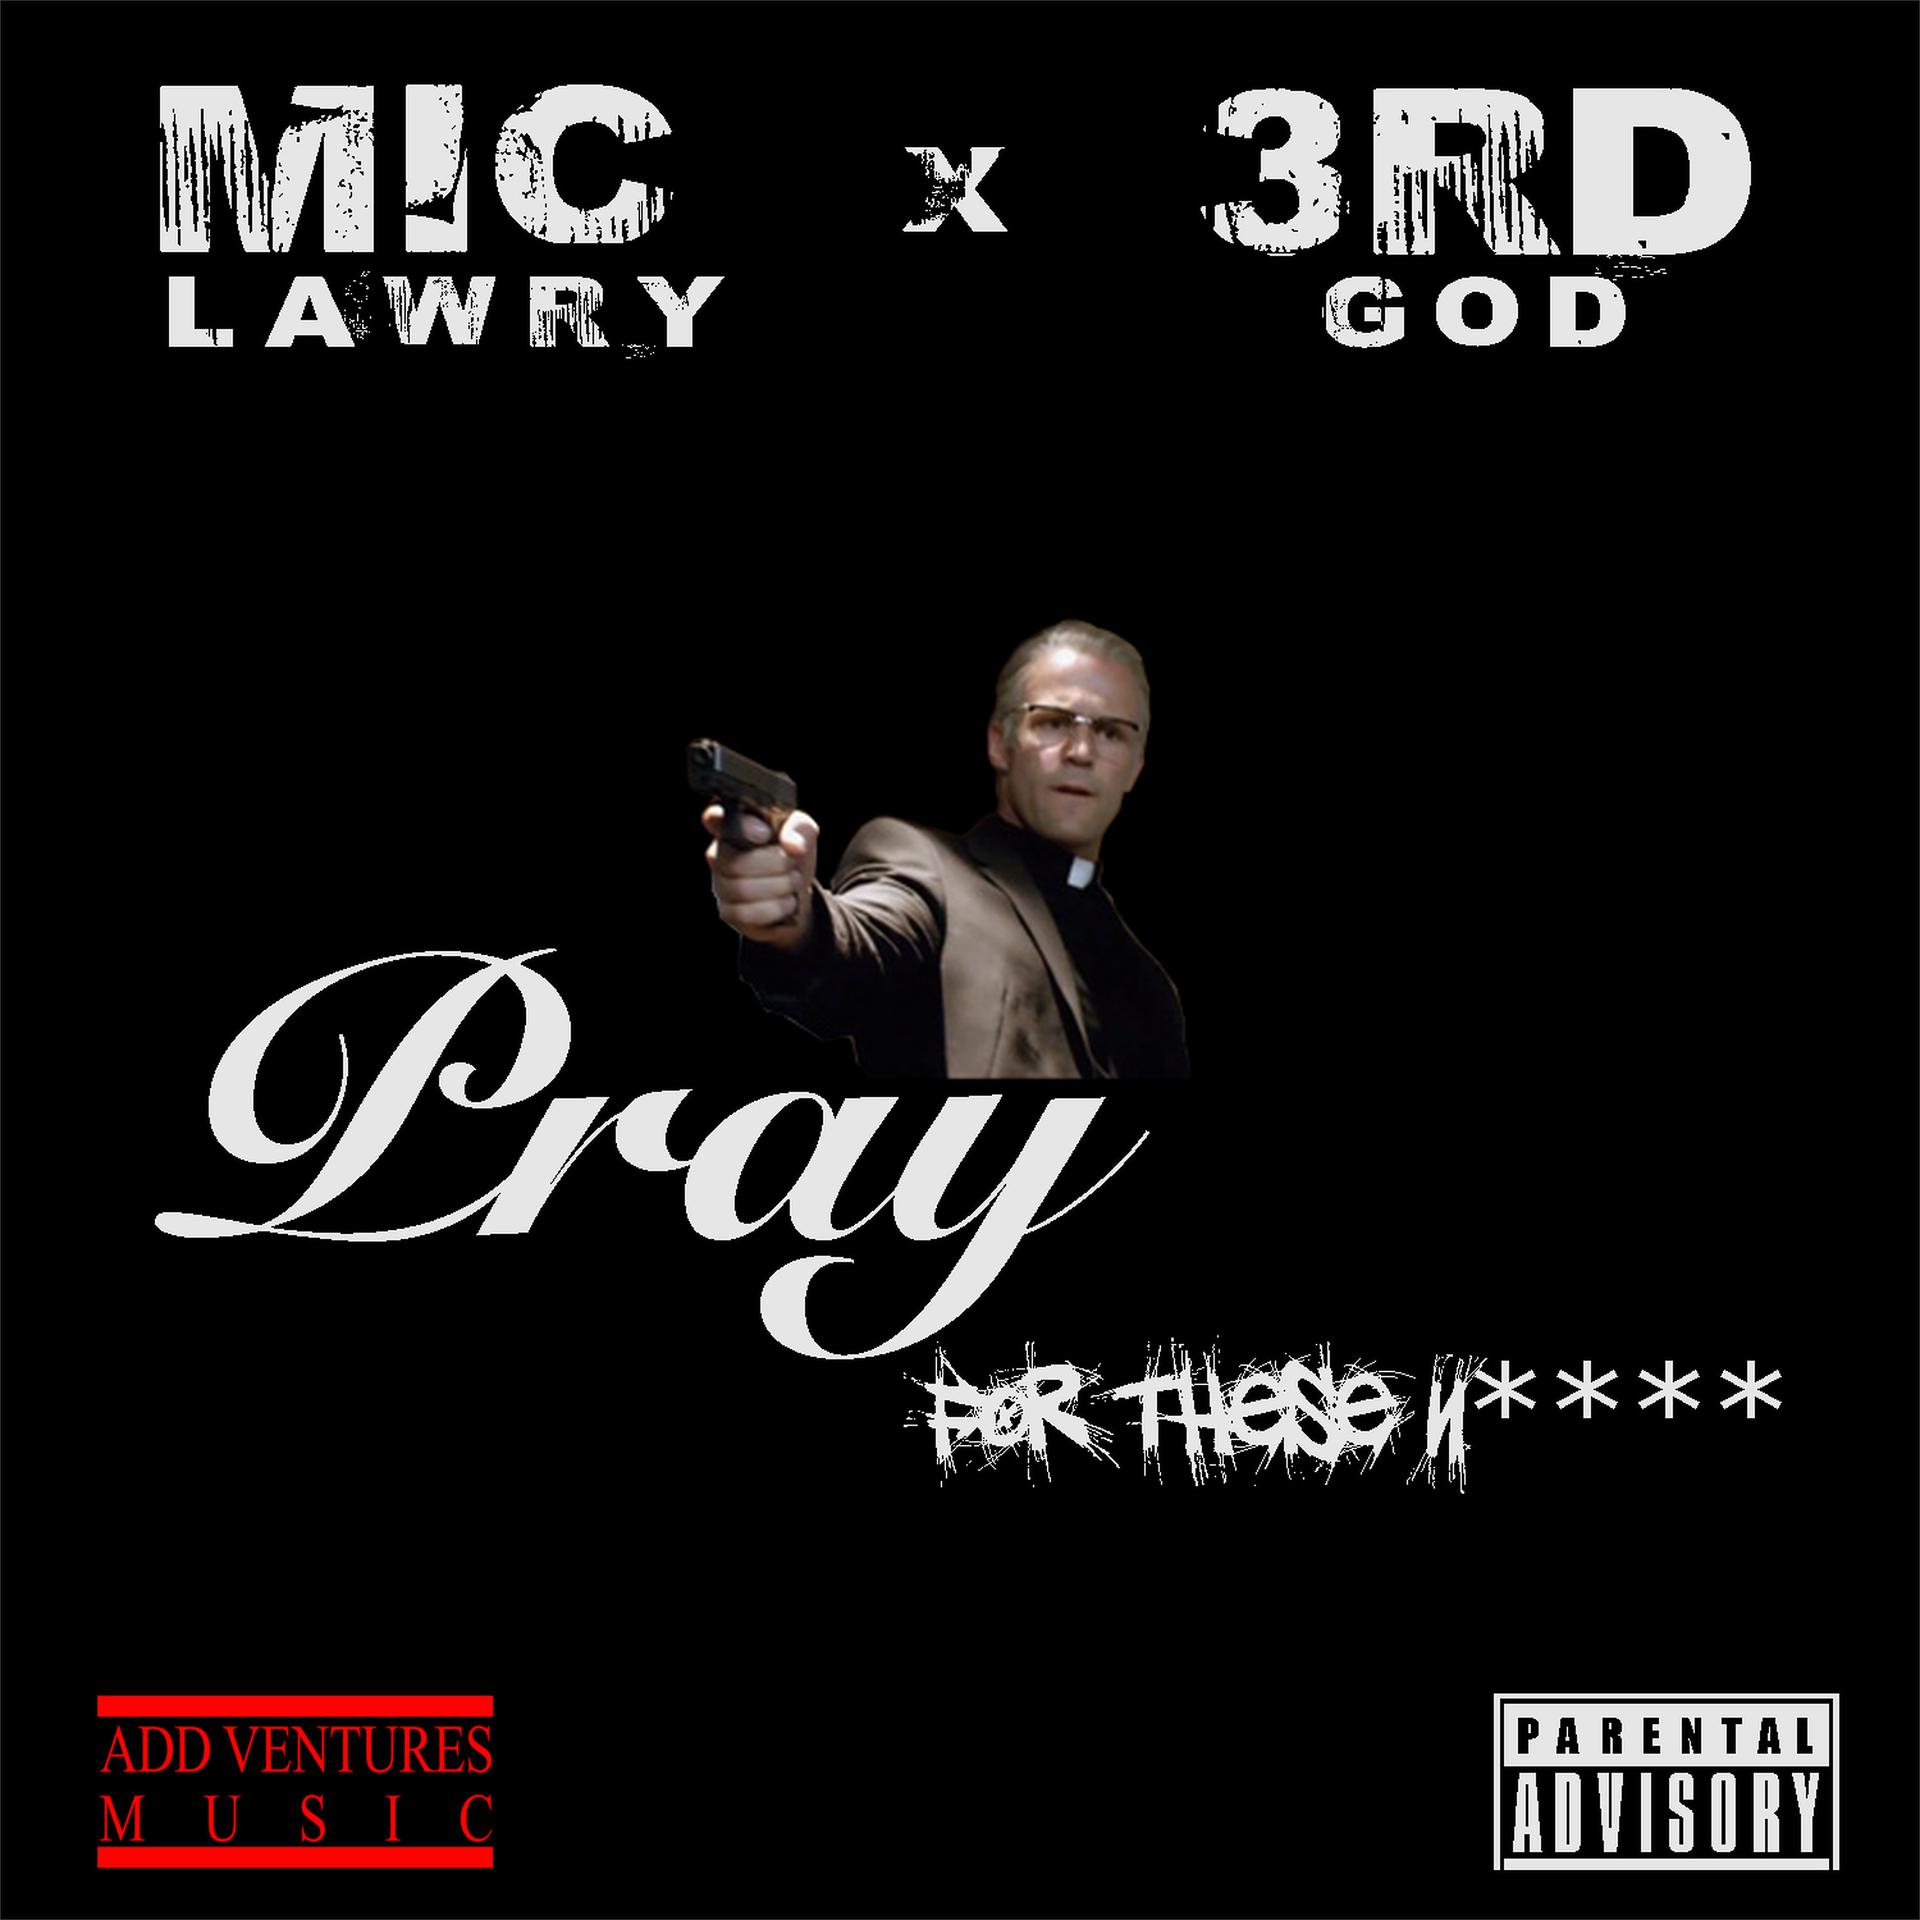 Постер альбома Pray For These Niggas (feat. 3rd God)s